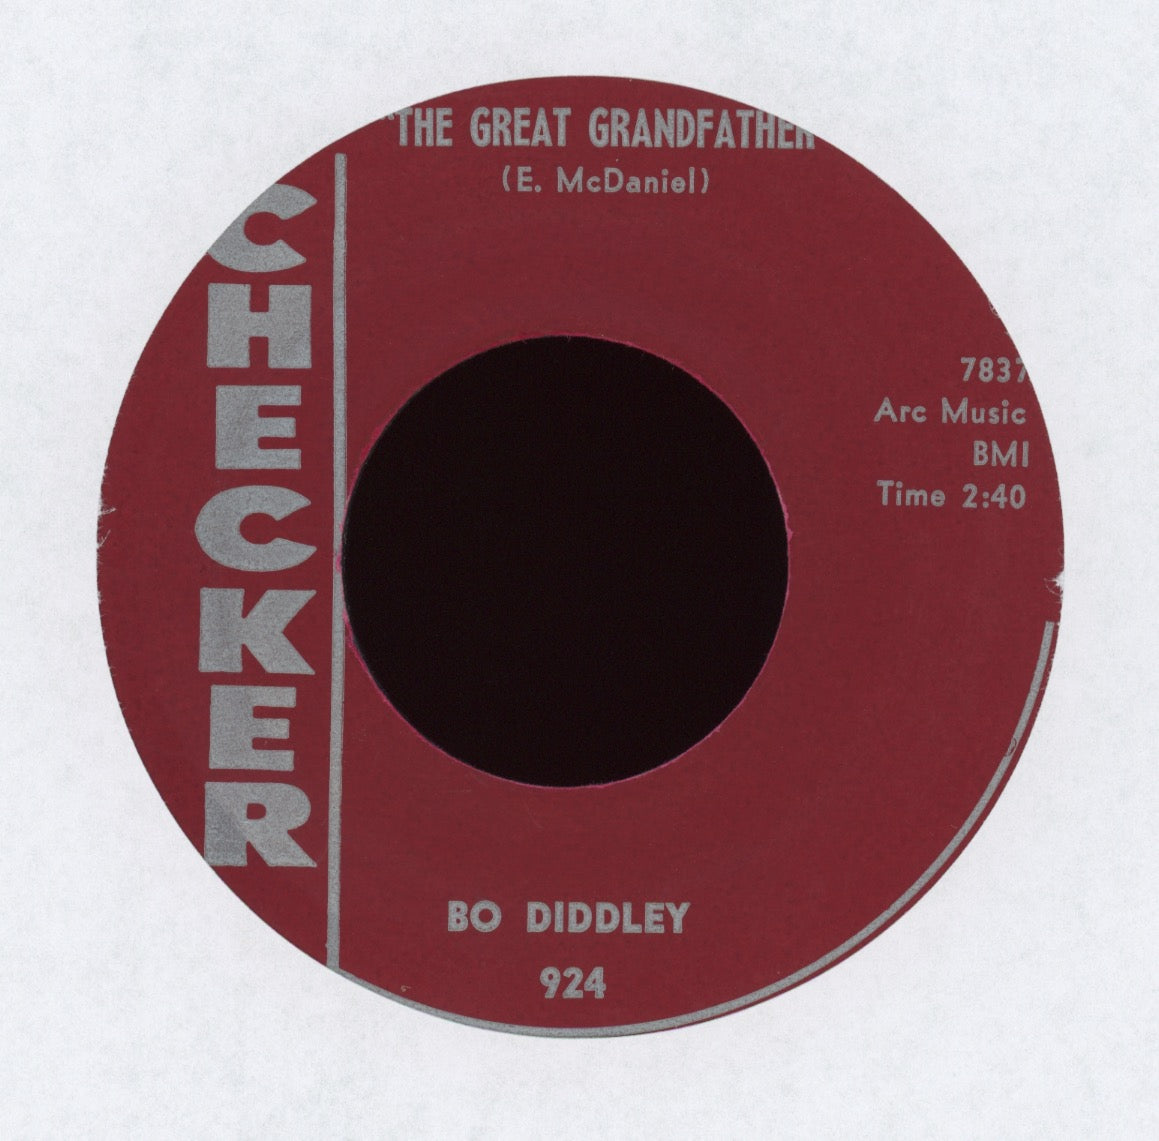 Bo Diddley - The Great Grandfather on Checker